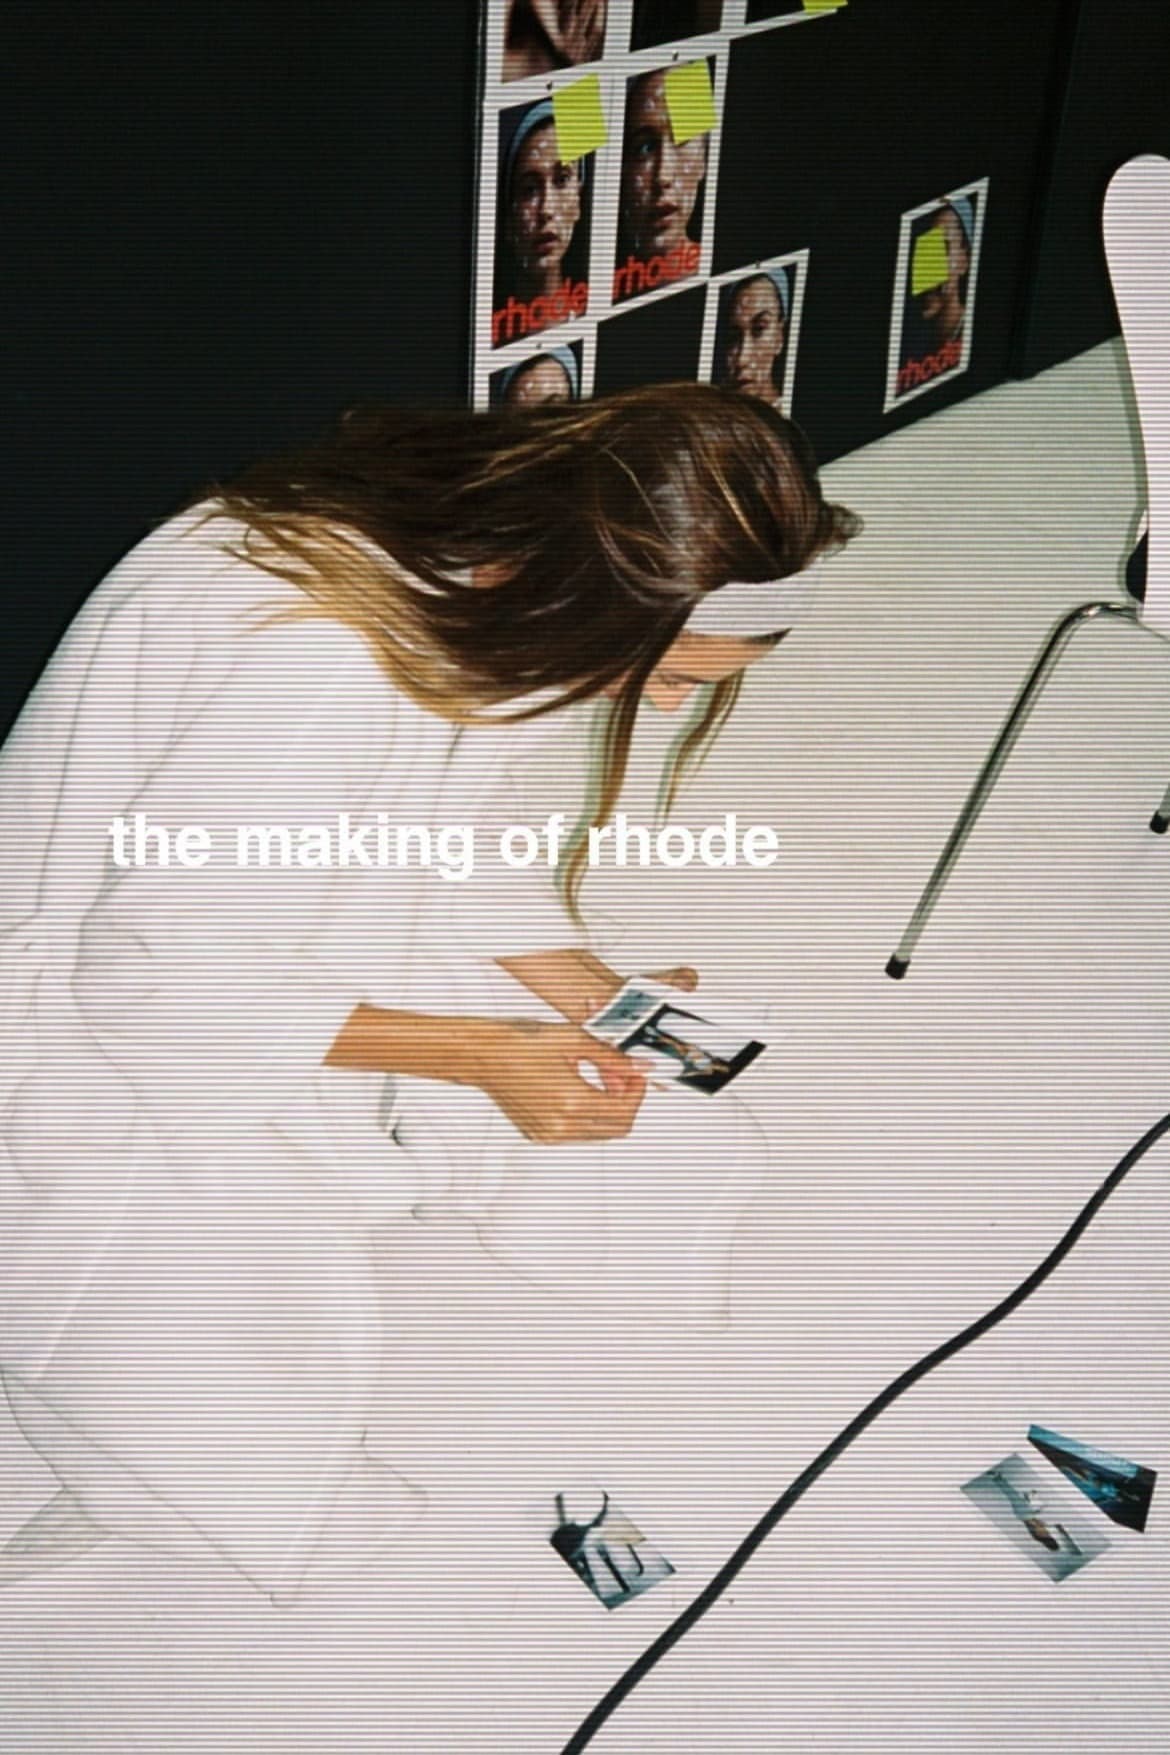 The Making of Rhode